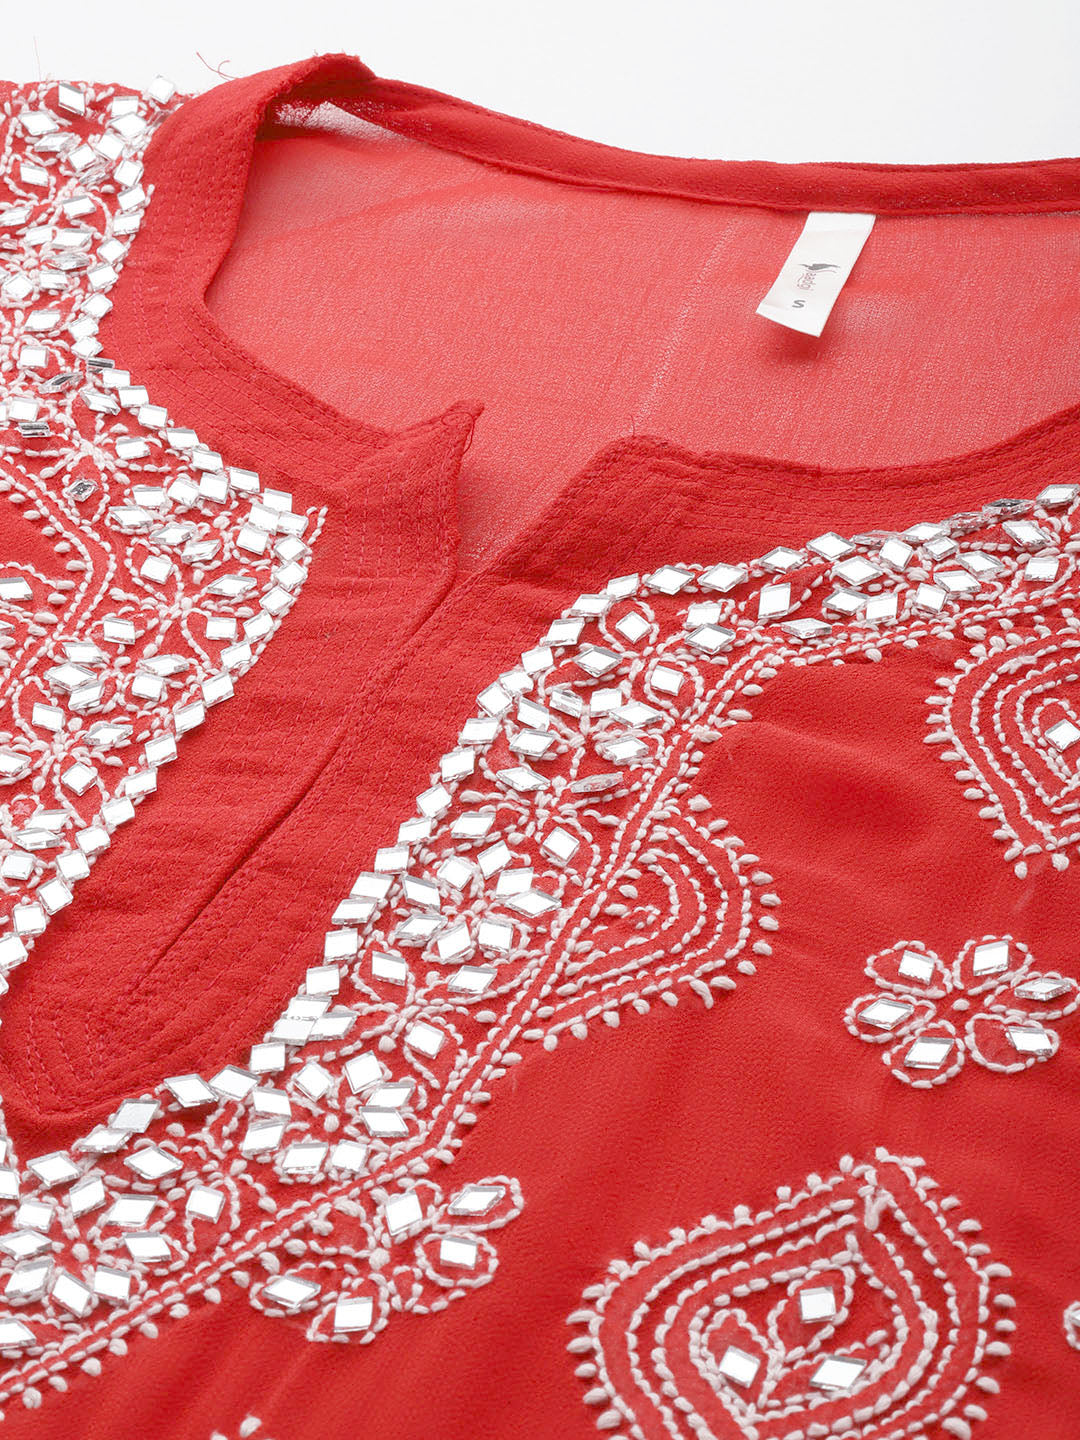 This exquisite features traditional chikankari mirror work and authentic embroidery, making it perfect for festive and party wear. Enjoy the luxurious look of chikankari work with the timeless elegance. The art of embroidery is in new trend of ethnic and Indo Western culture. The very first thing that catches the attraction is the Chikankari with Mirror work and though this outfit works out the best In all the perfect evenings and day family gathering.